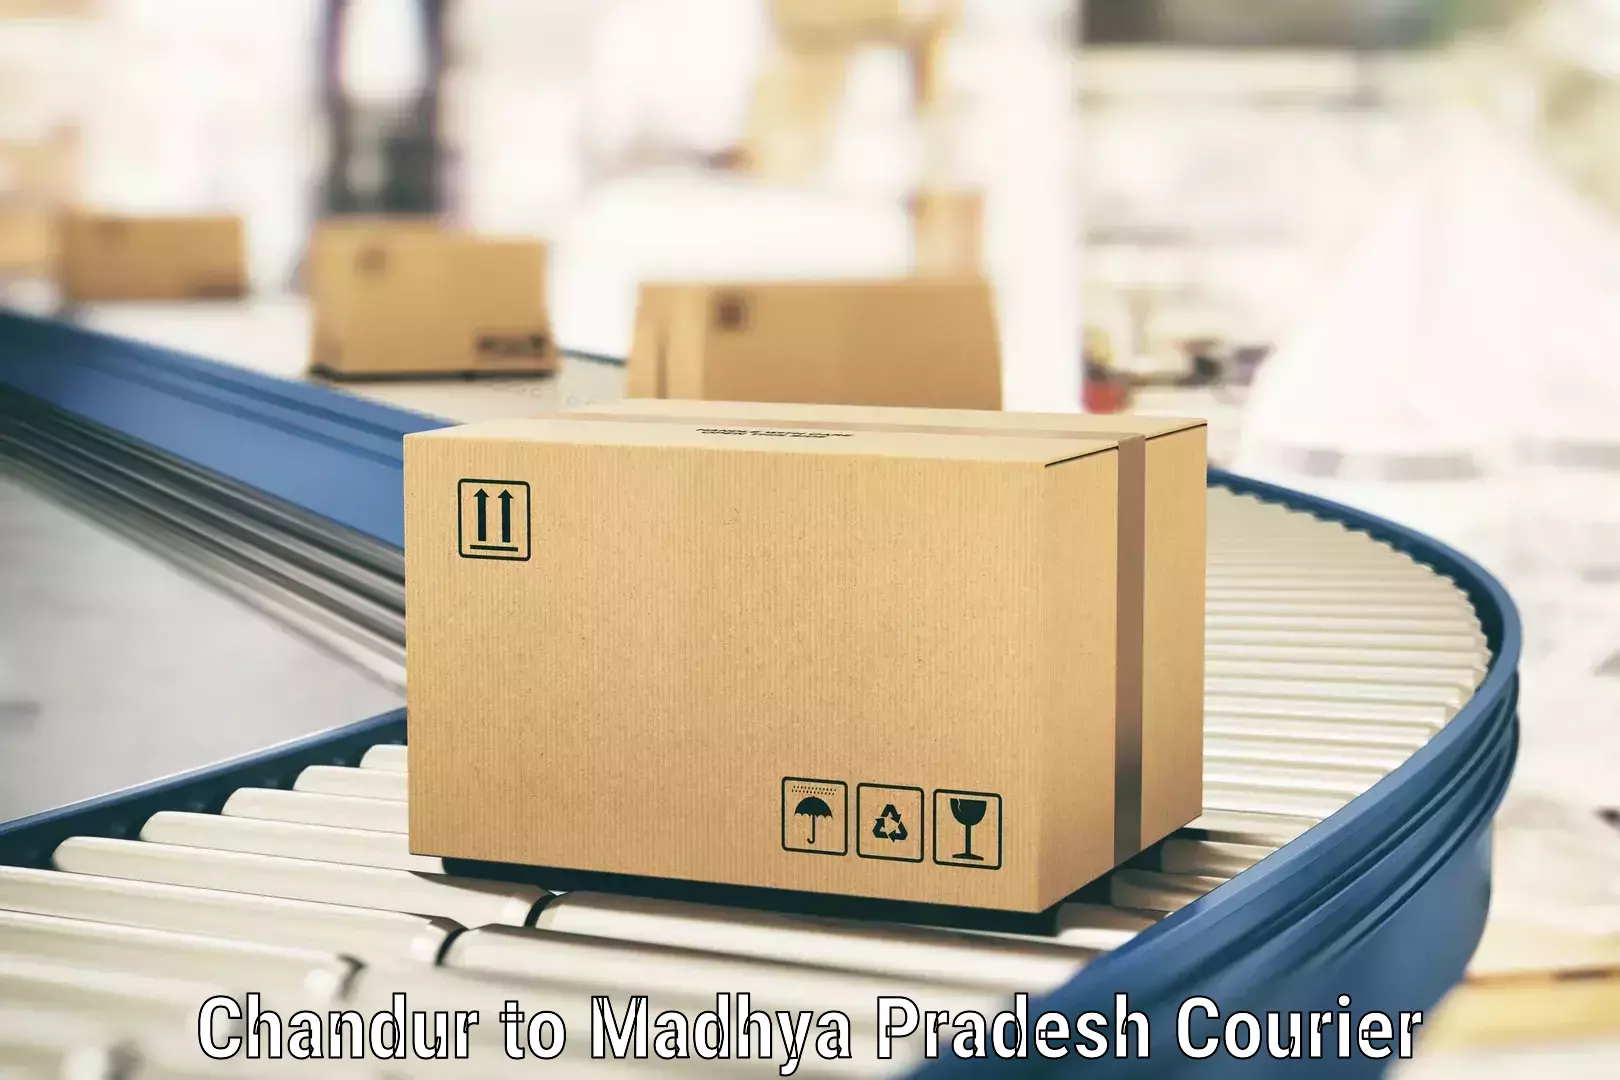 Full-service courier options Chandur to Khargone